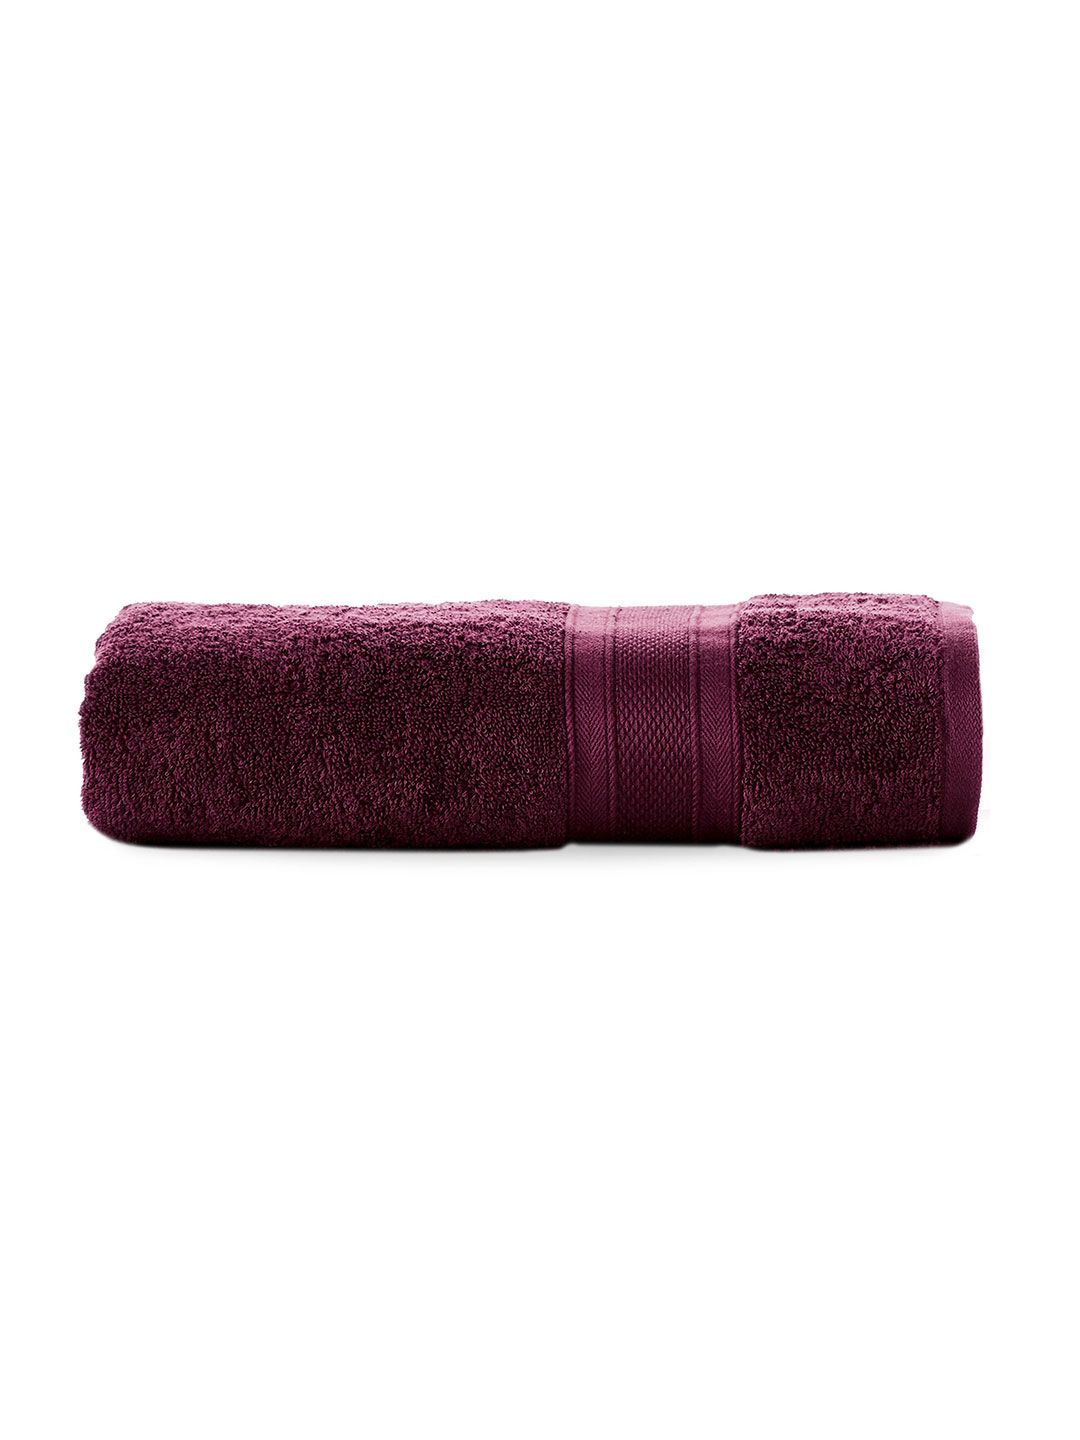 Trident Burgundy Solid Pure Cotton 500 GSM Bath Towel Price in India